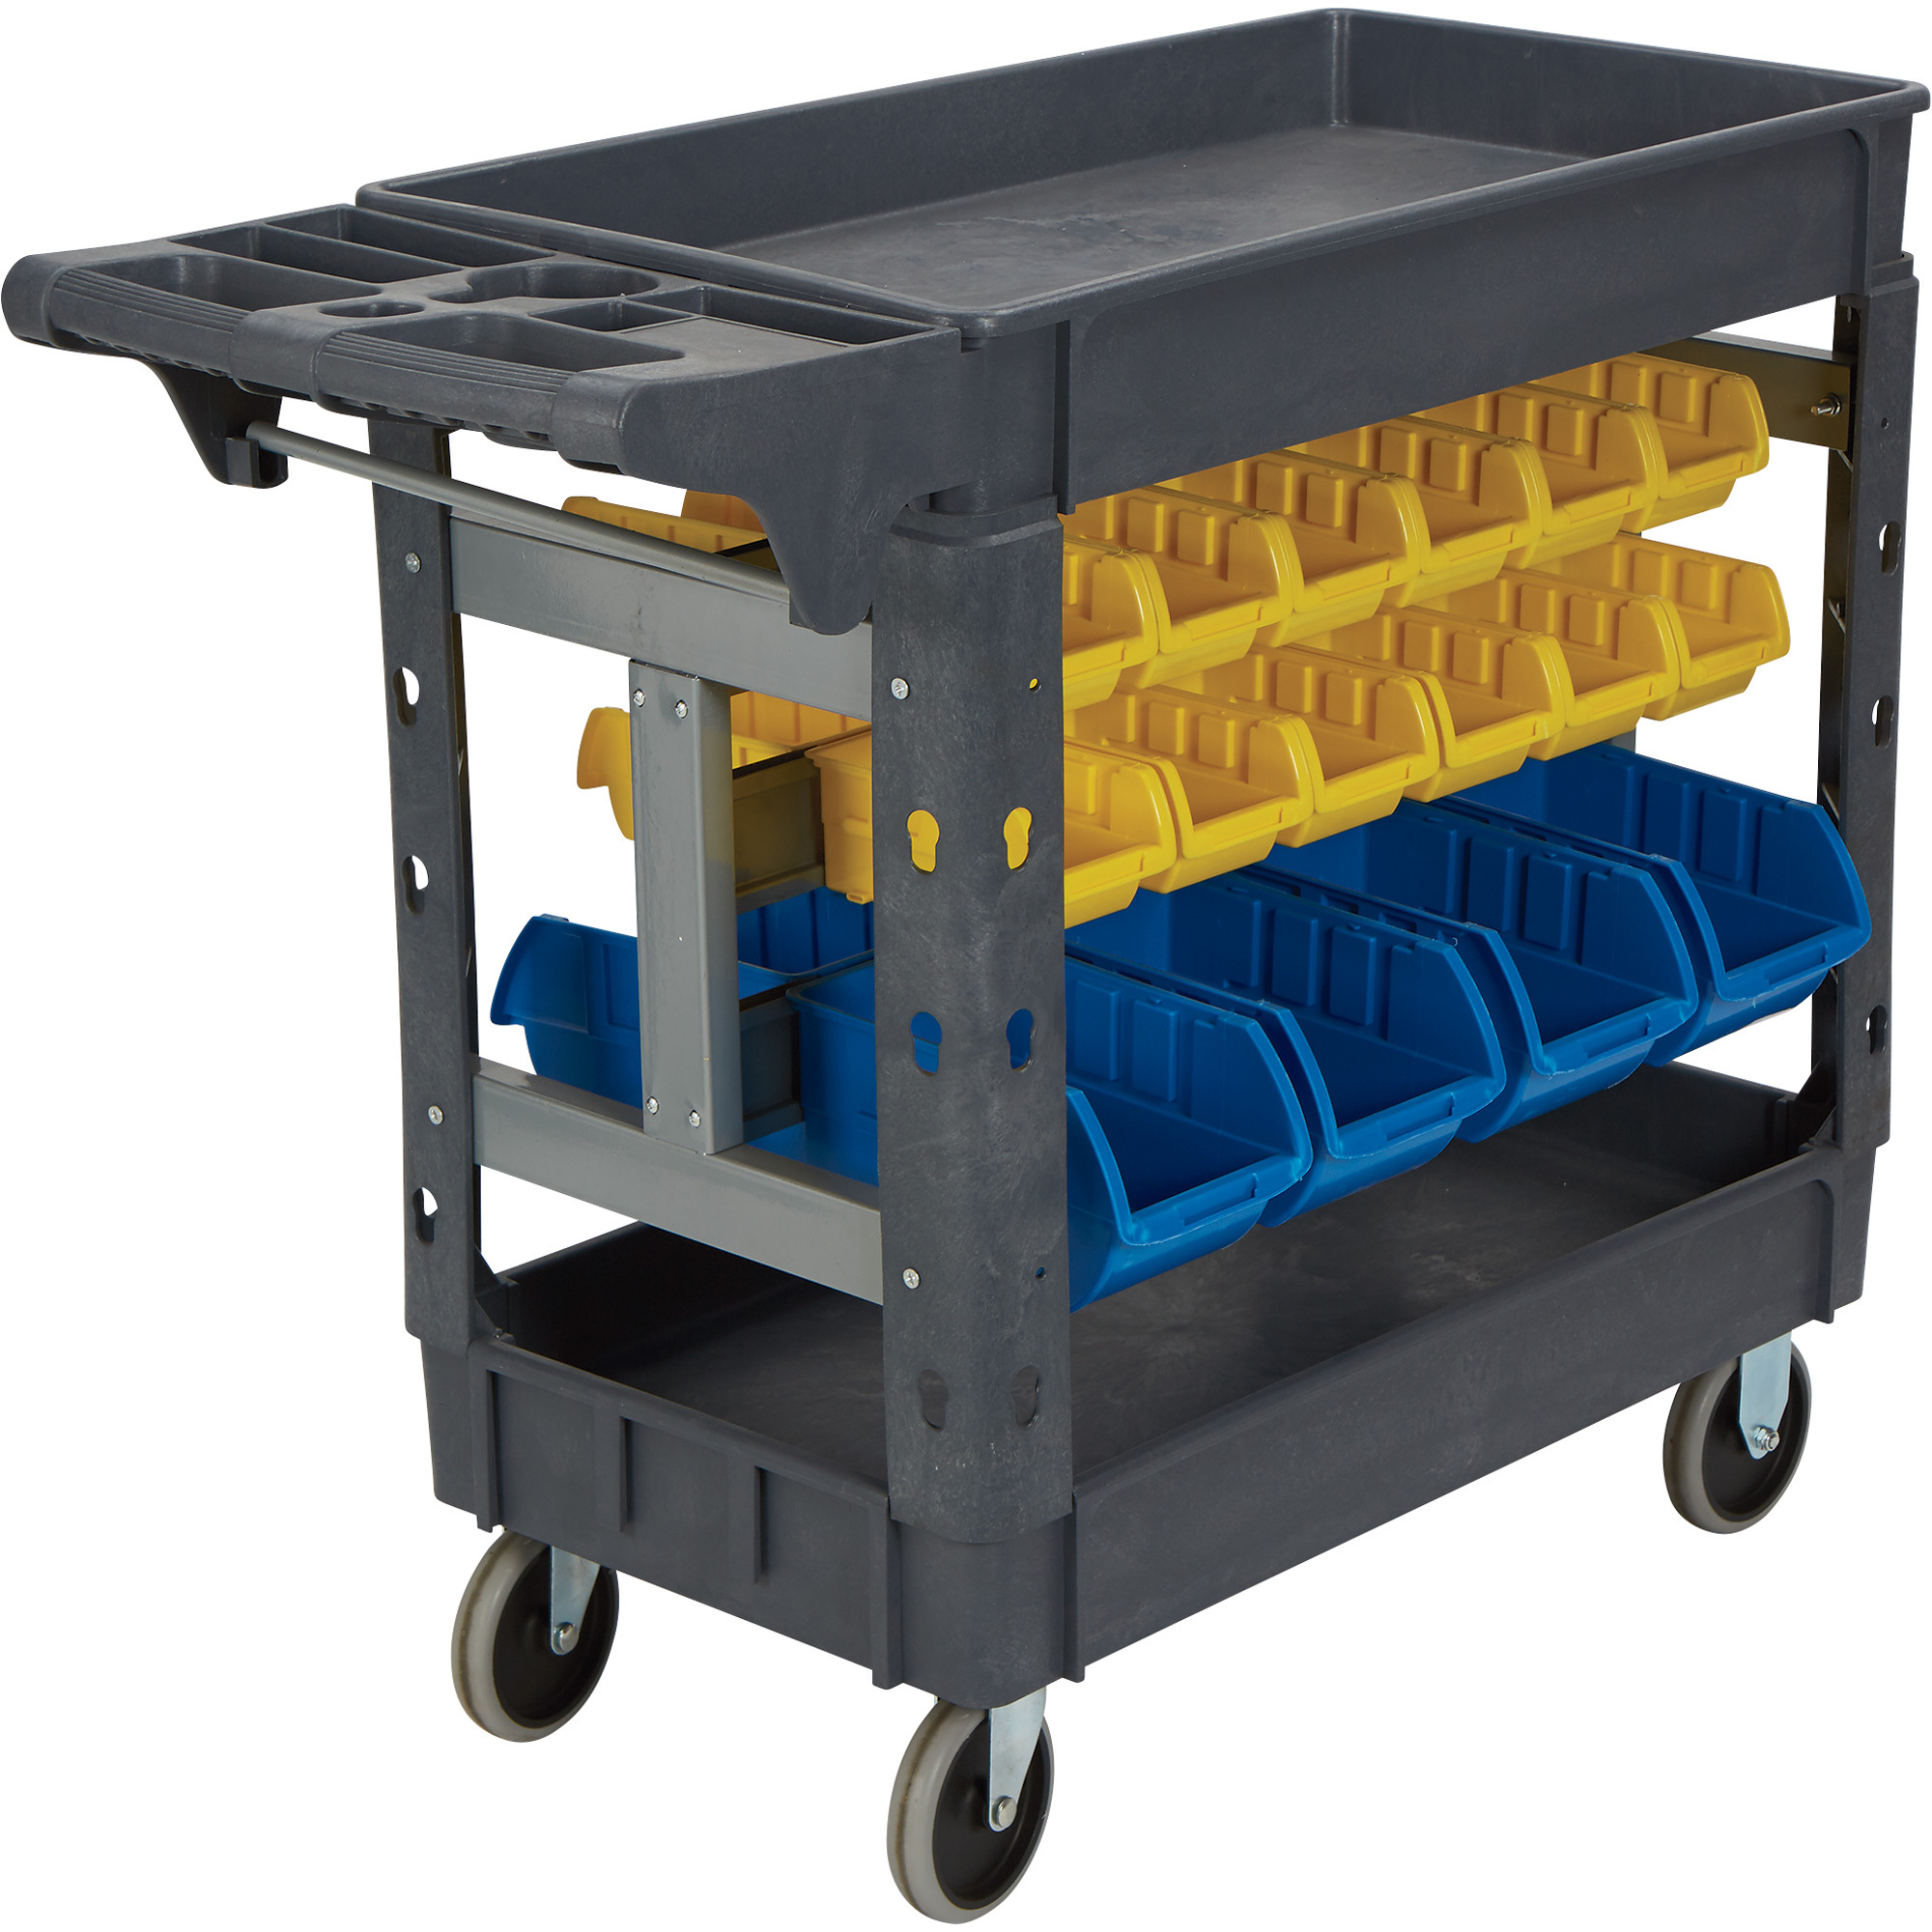 Strongway 500-Lb. Service Cart with Bins â 40 3/8Inch W X 17 5/16Inch D X 33 5/8Inch H